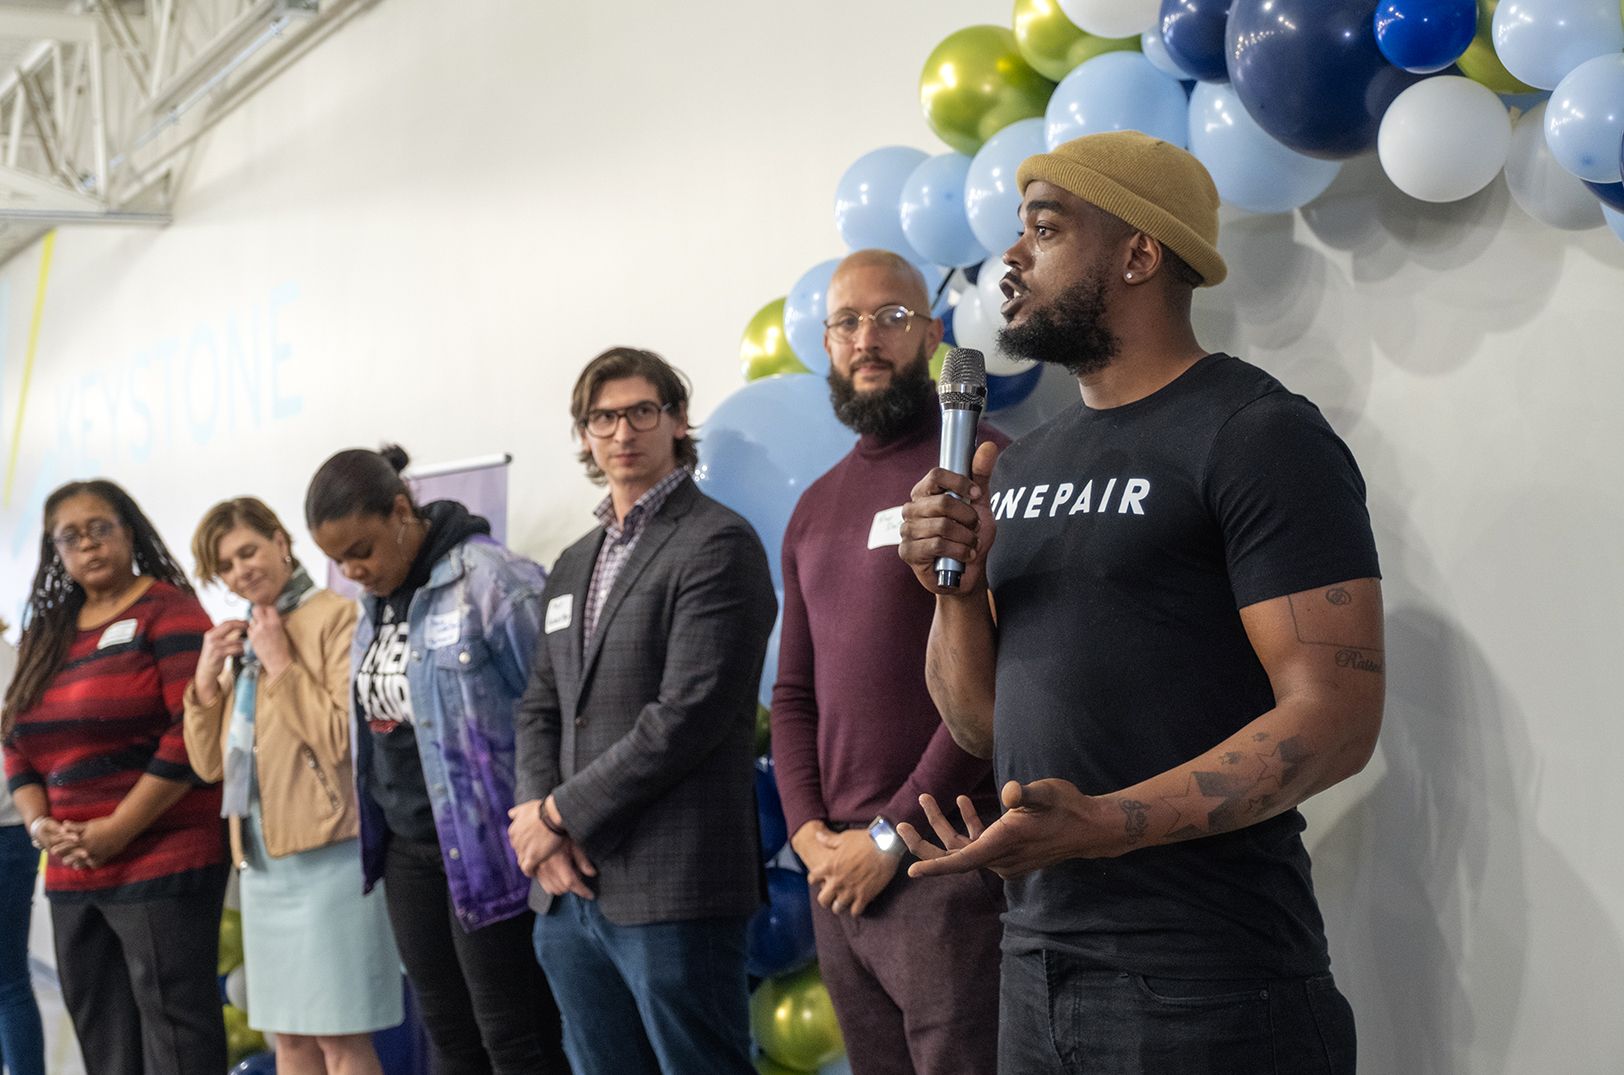 Meet seven founders hoping to pay their bills while changing the world; LaunchKC Social Venture Studio unveils first cohort